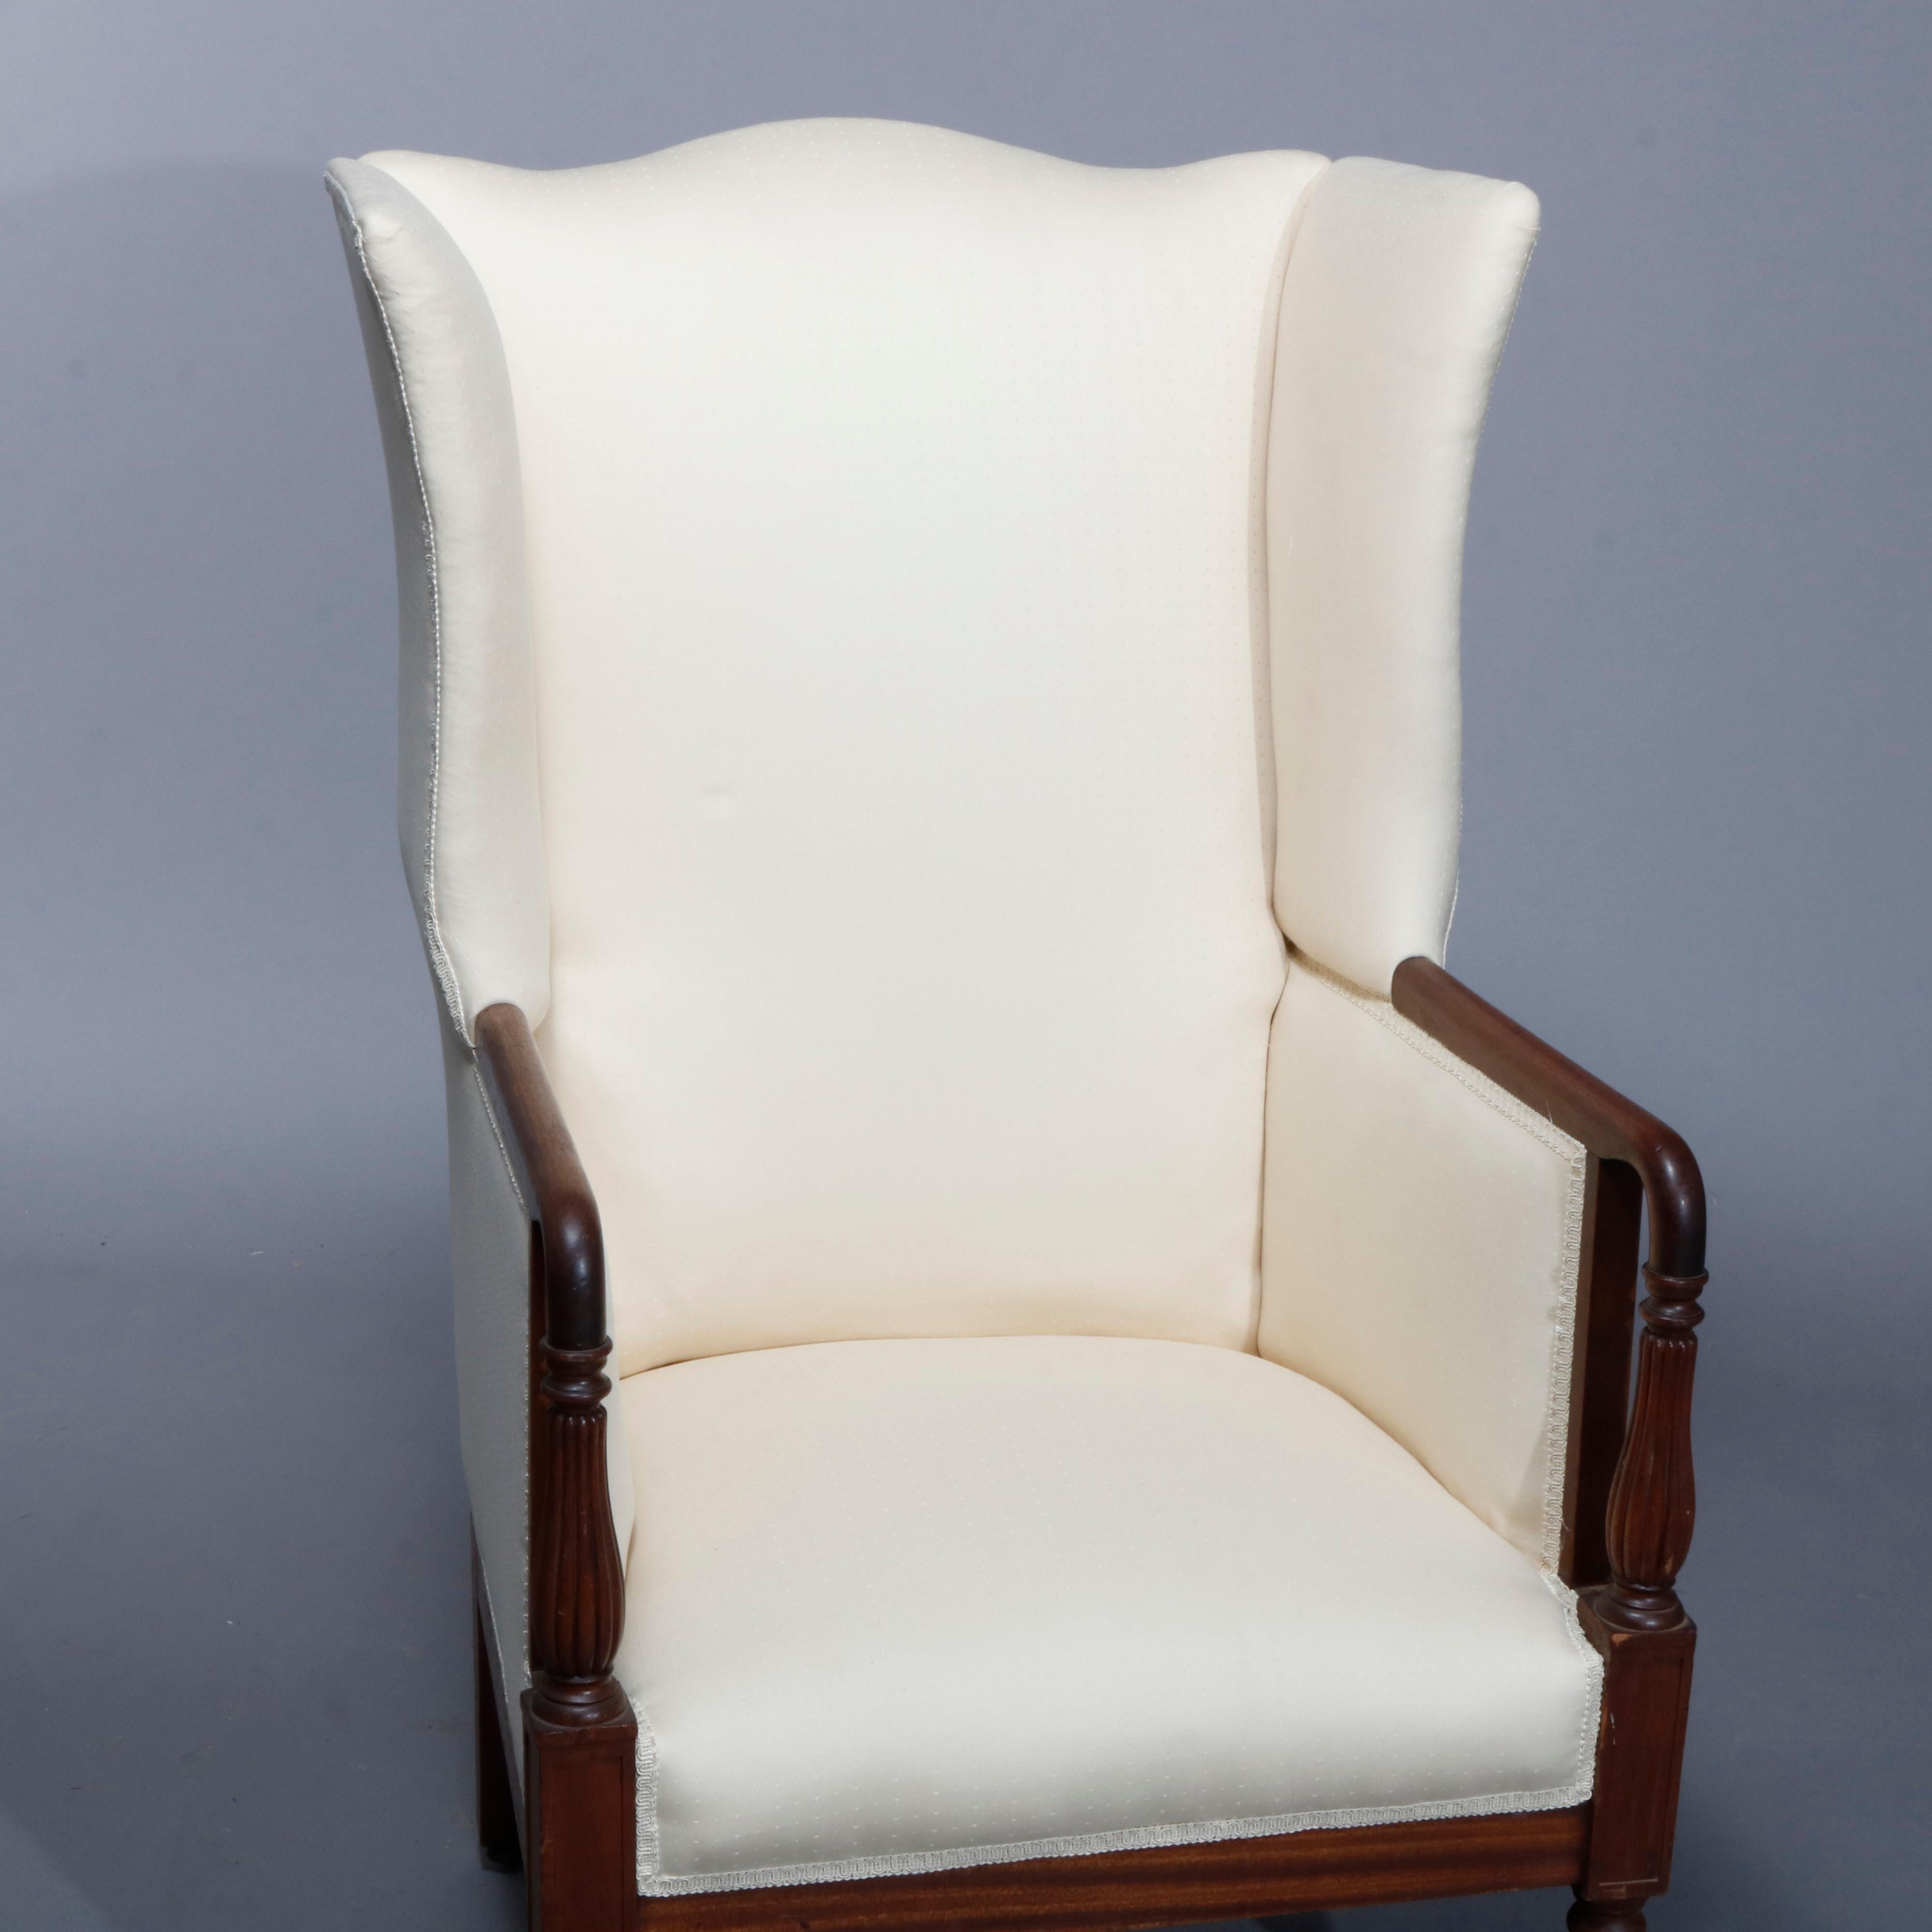 American Antique Period Sheraton Mahogany Fireside Upholstered Wingback Chair, circa 1830